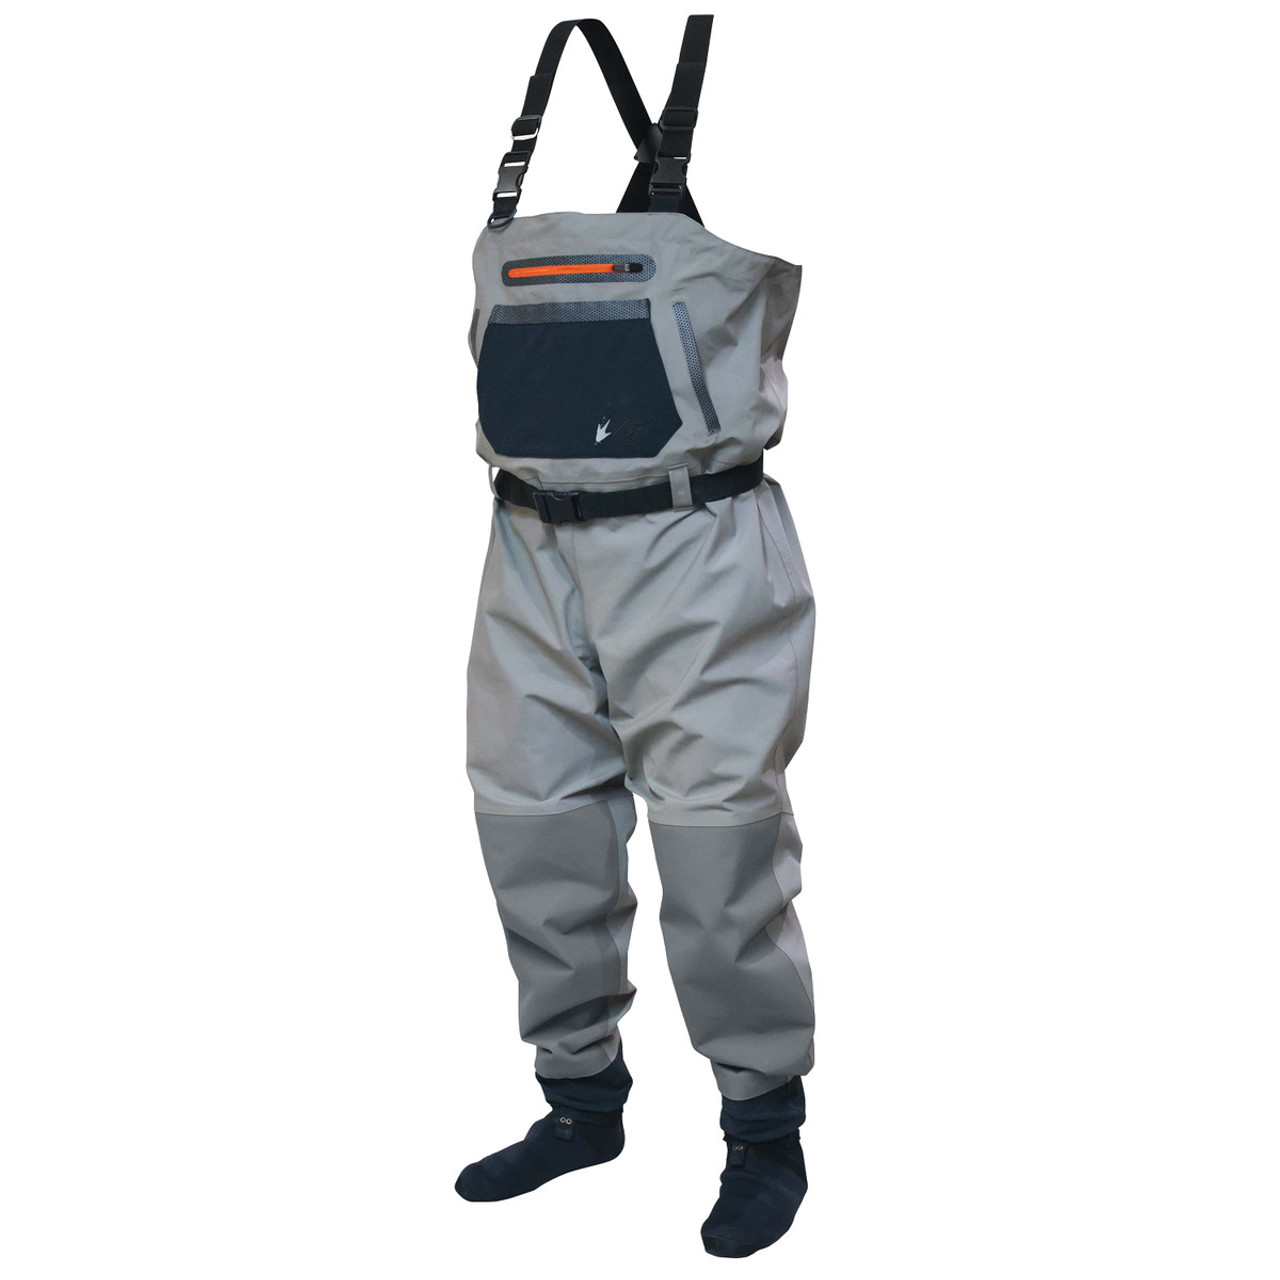 Cabela's Premium Breathable Stocking-Foot Pant Waders for Men | Cabela's